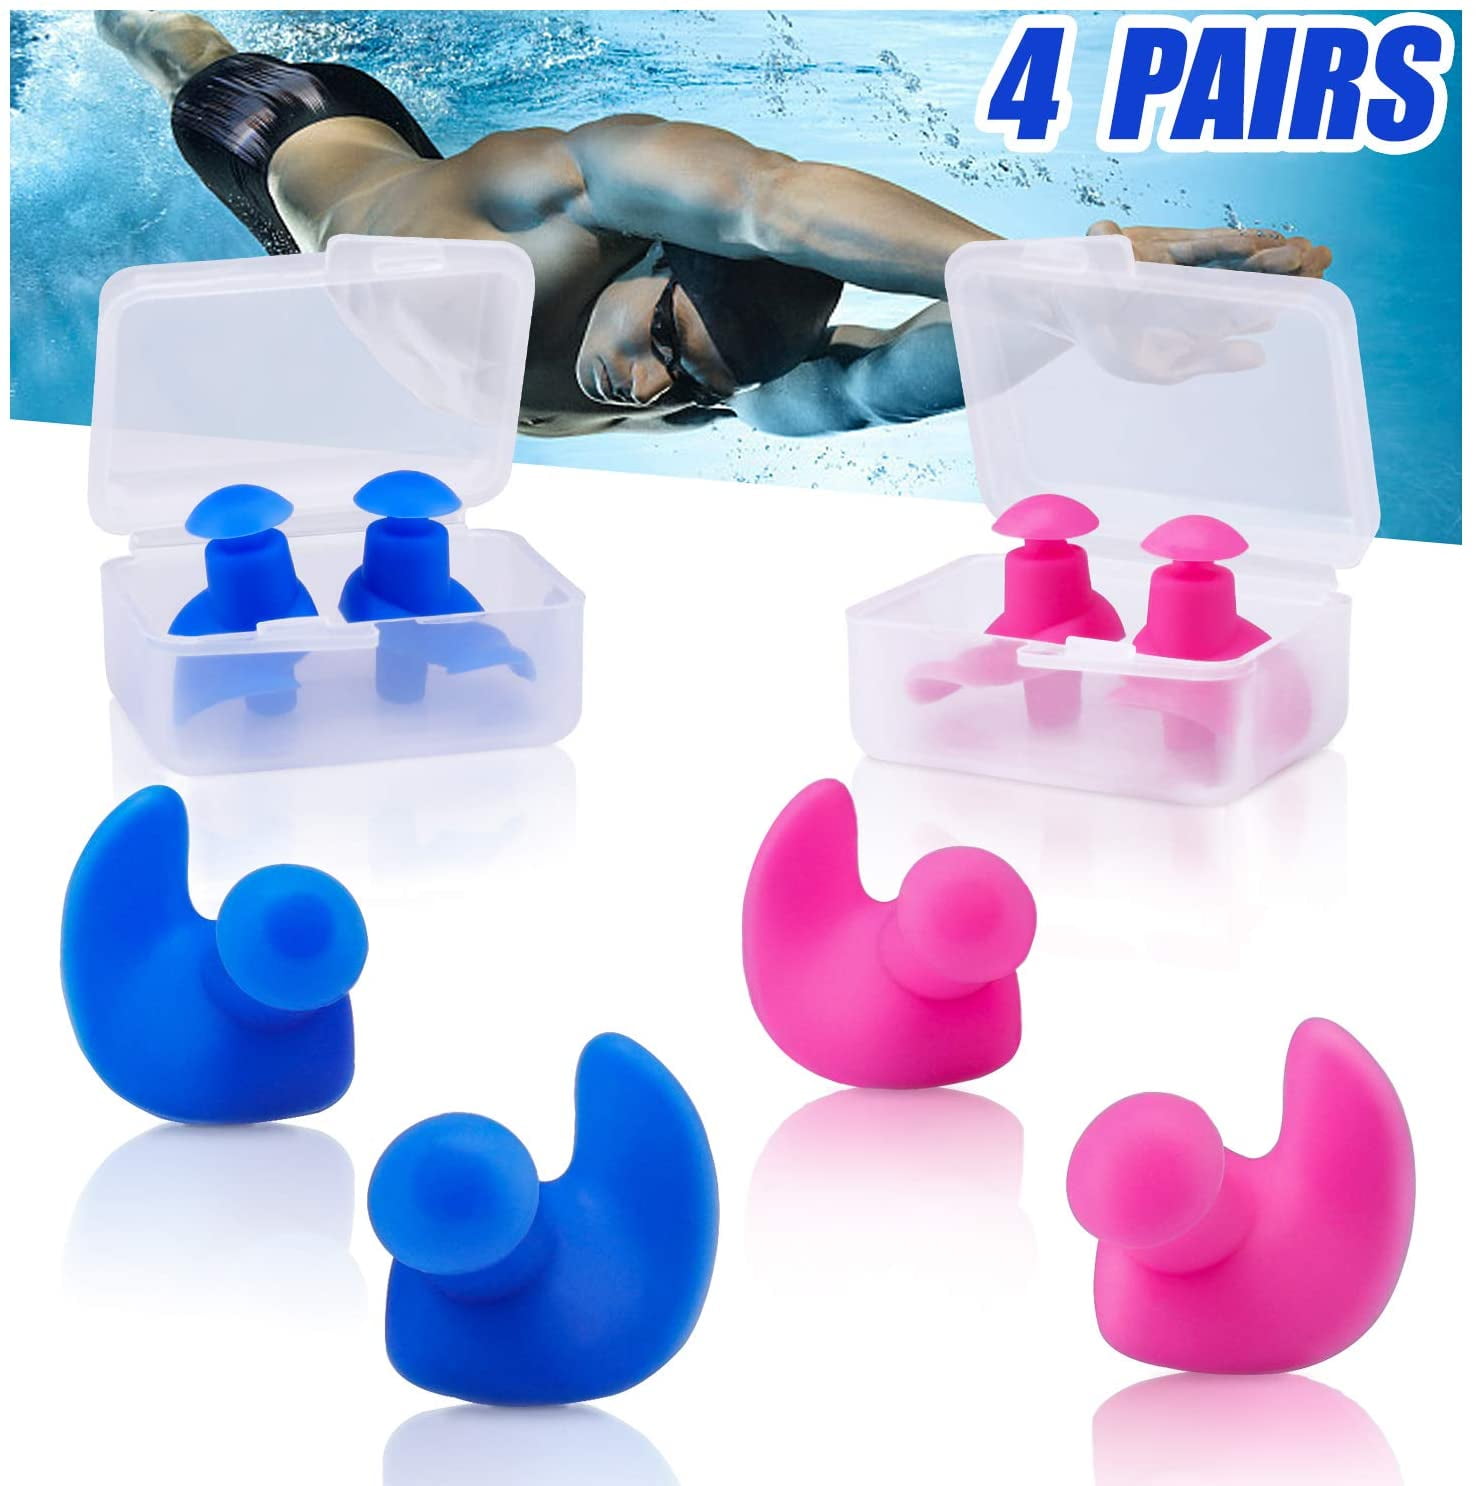 Soft Silicone Waterproof Swim Shower Ear Plugs For Swimmers Adult Kids Children 